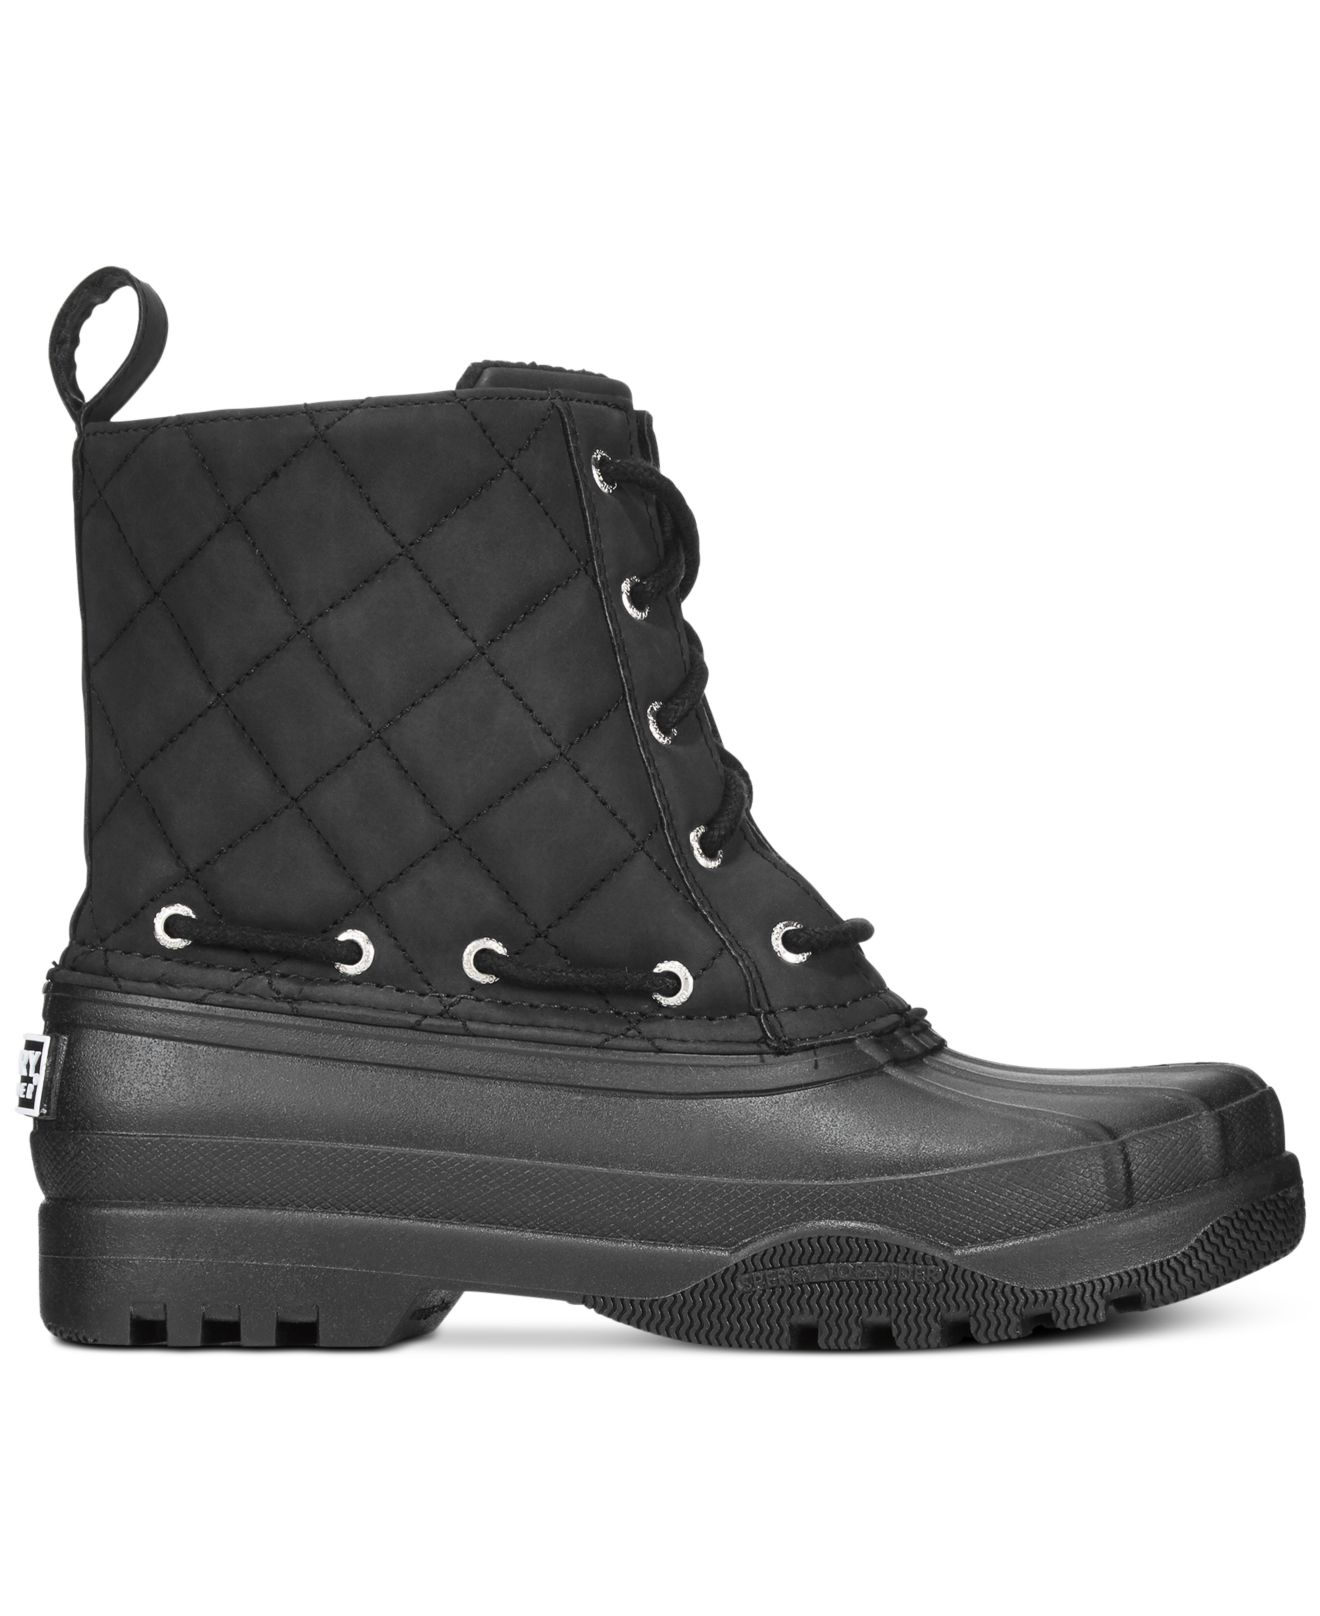 Gosling Quilted Rain Boots in Black 